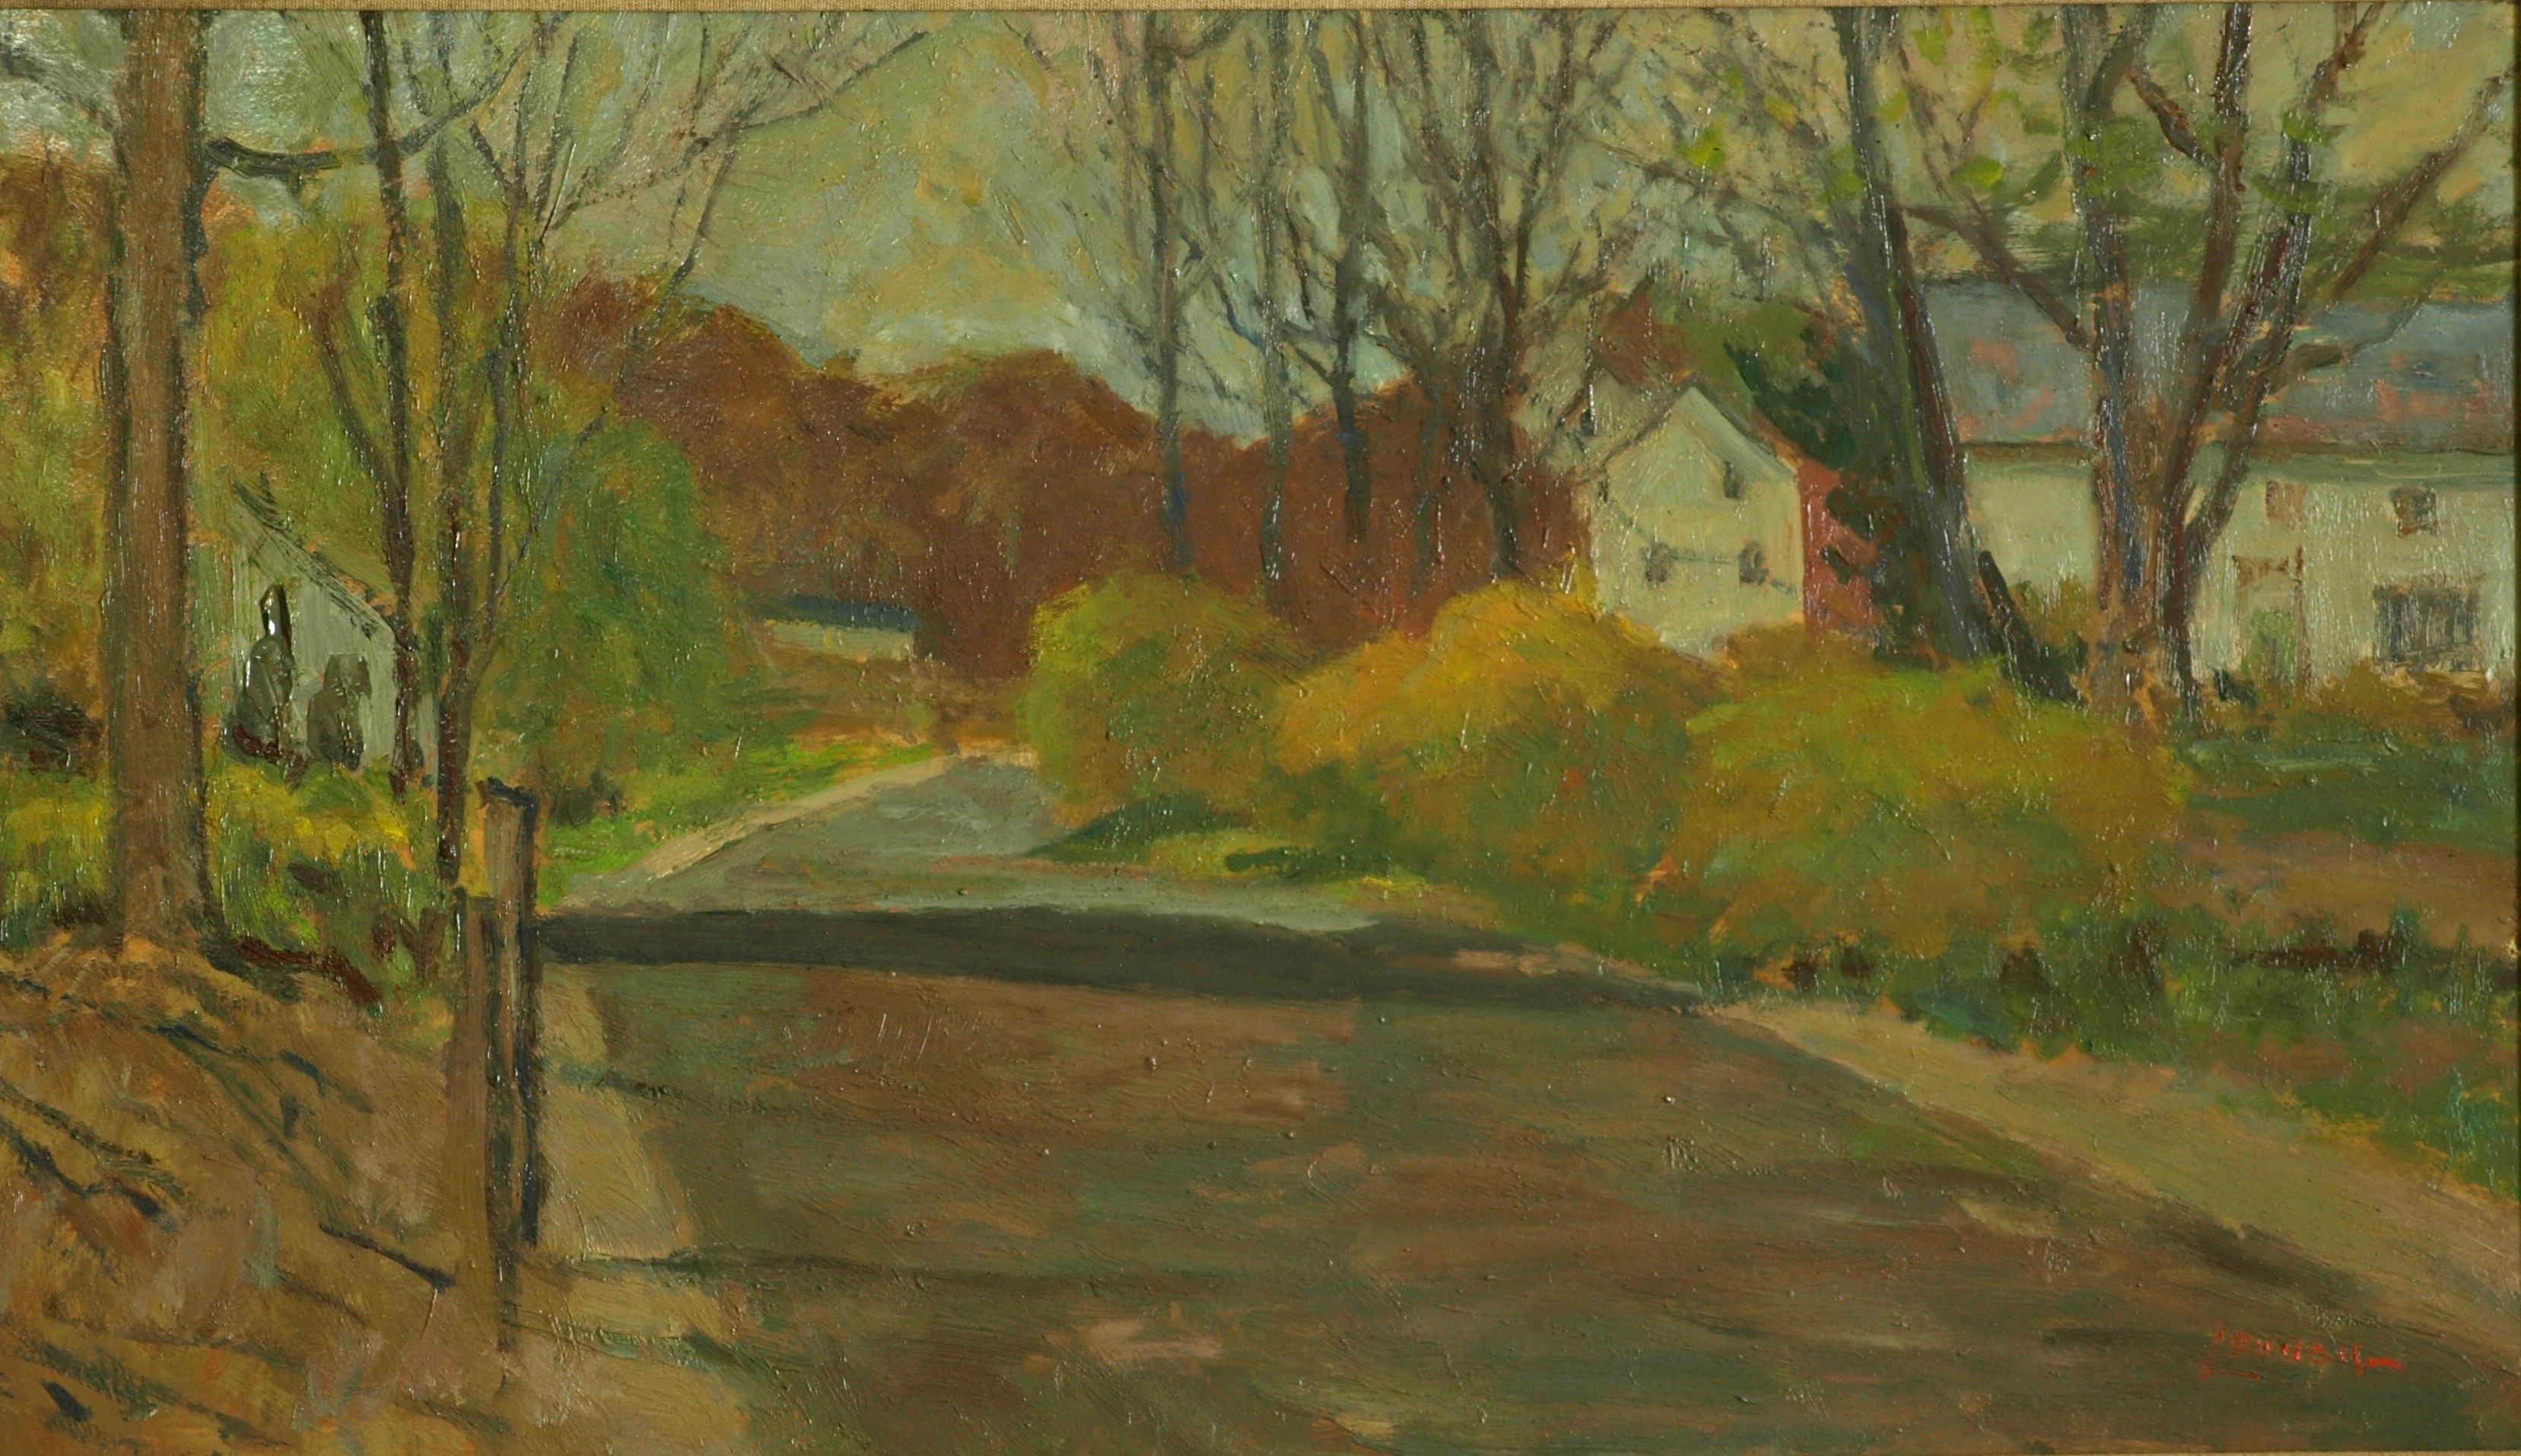 New England Spring, Oil on Panel, 17 x 29 Inches, by Bernard Lennon, $925